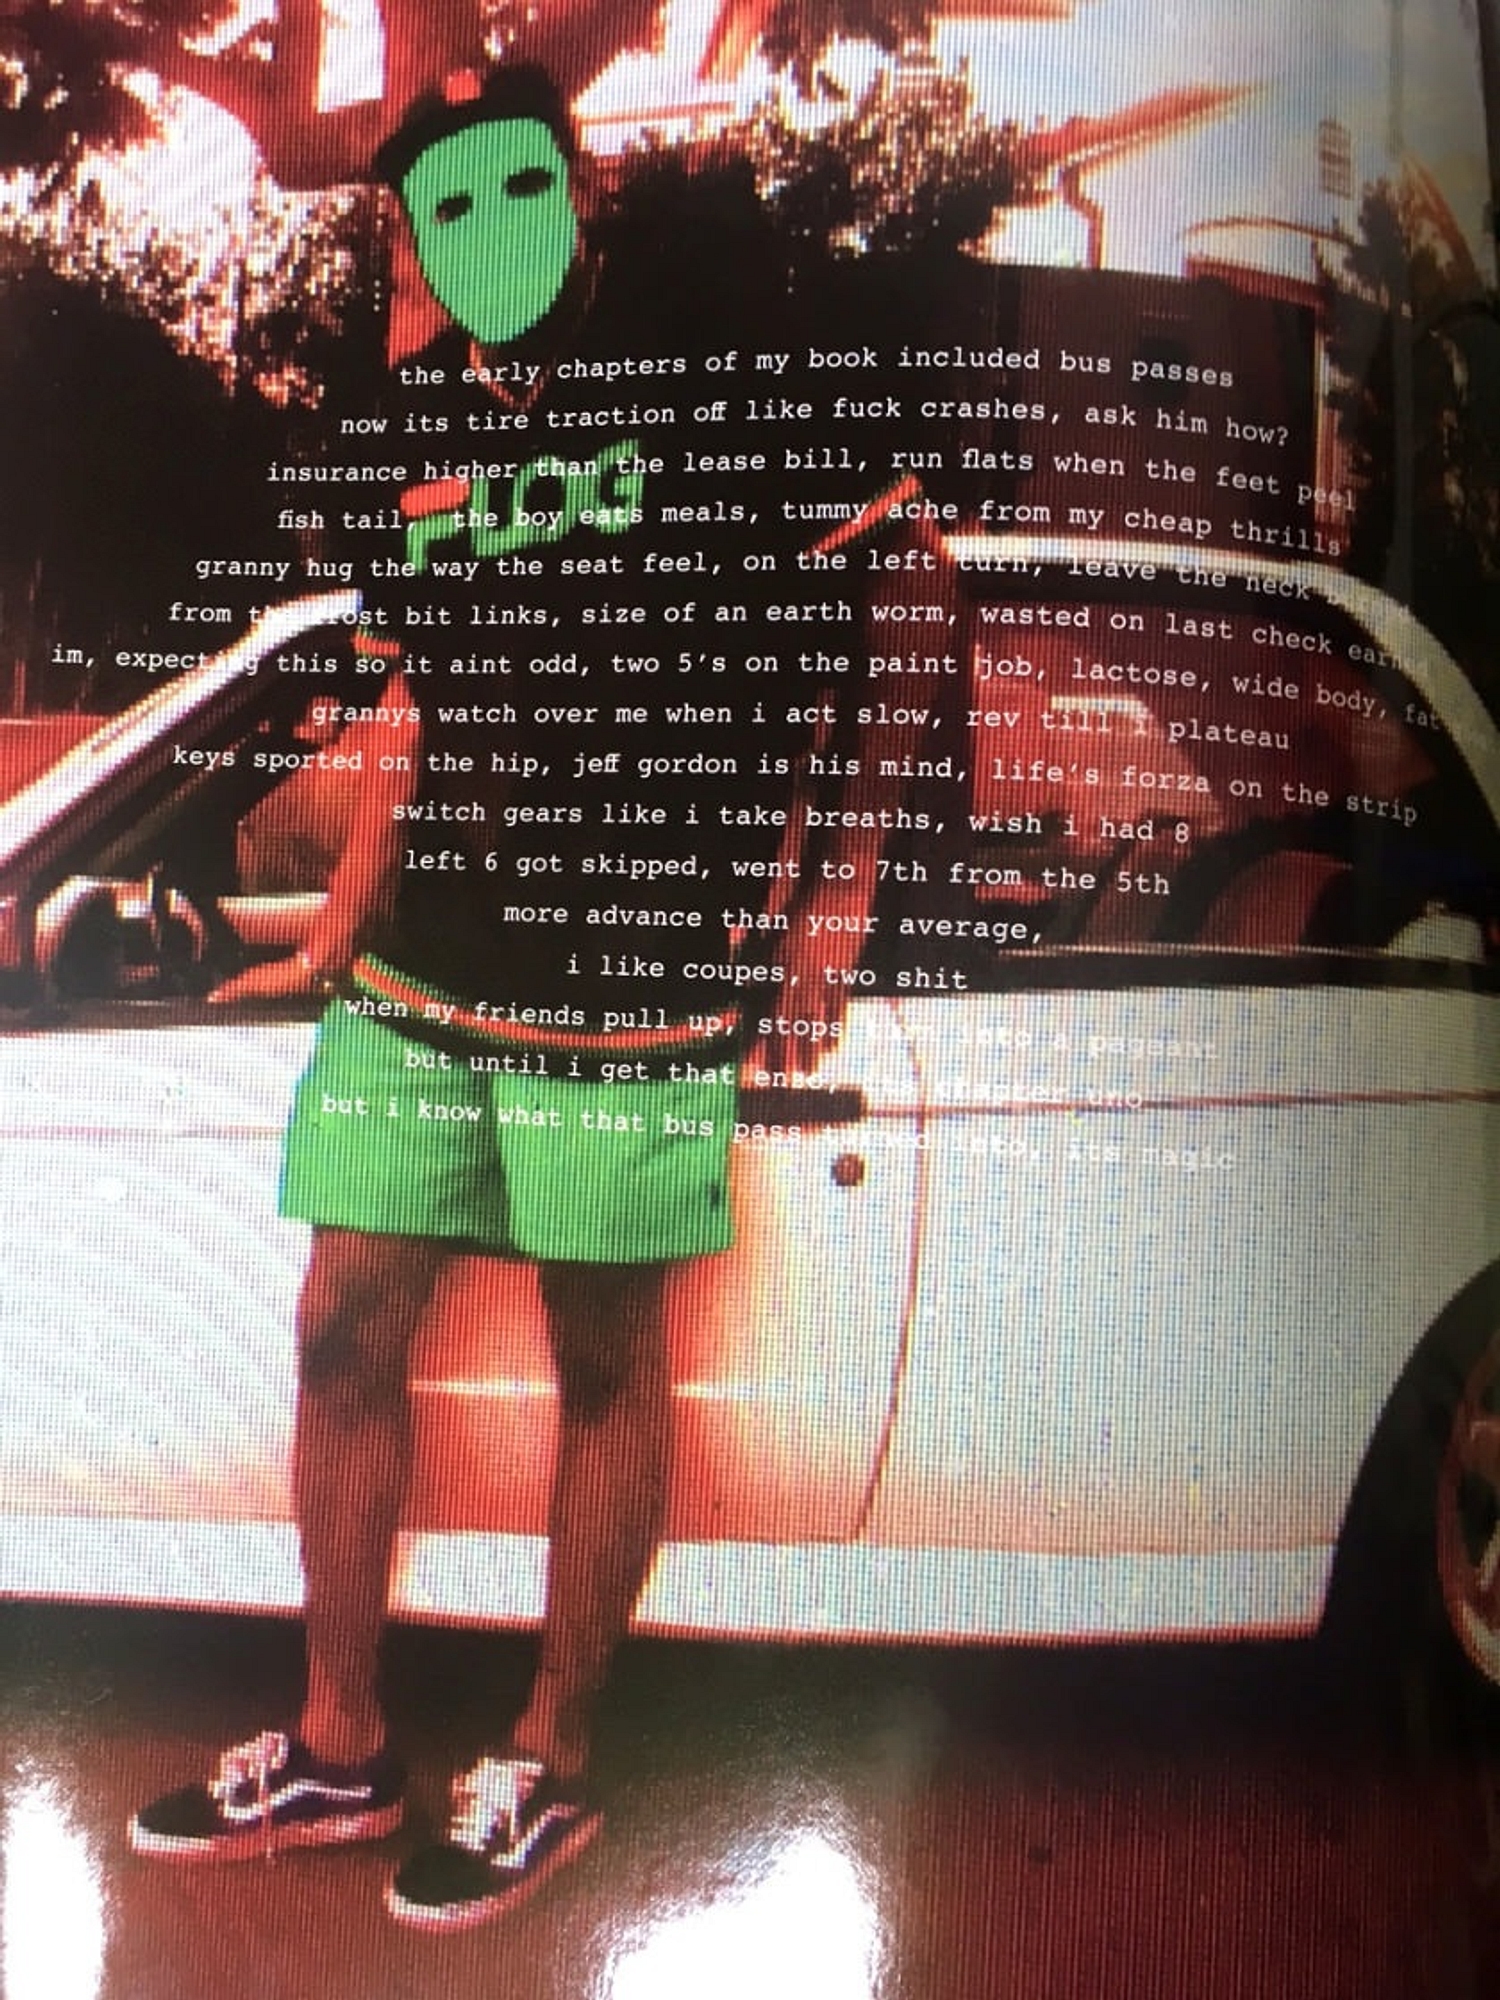 Read Tyler, The Creator's poem from Frank Ocean's 'Boys Don't Cry' magazine